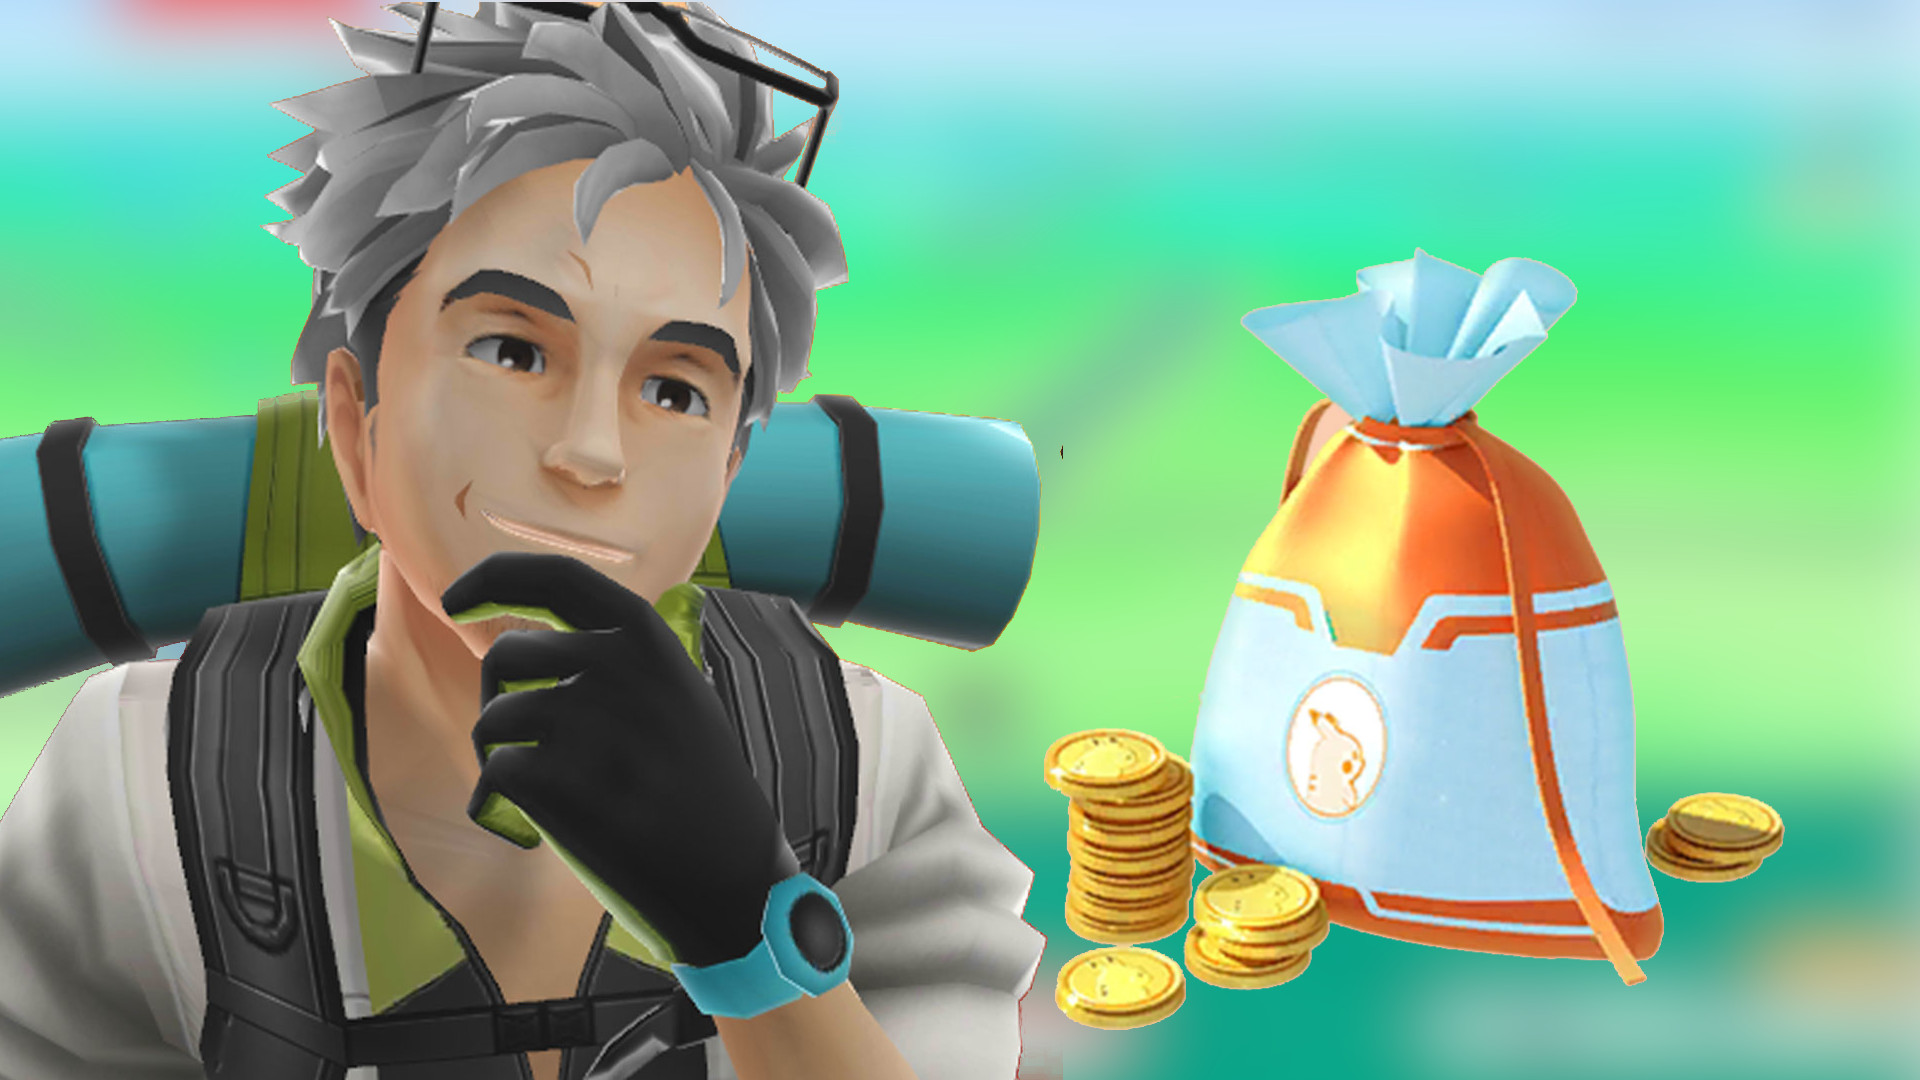 In Pokémon GO, Zarude is currently only available for real money – are you ready to pay for an exclusive Pokémon?